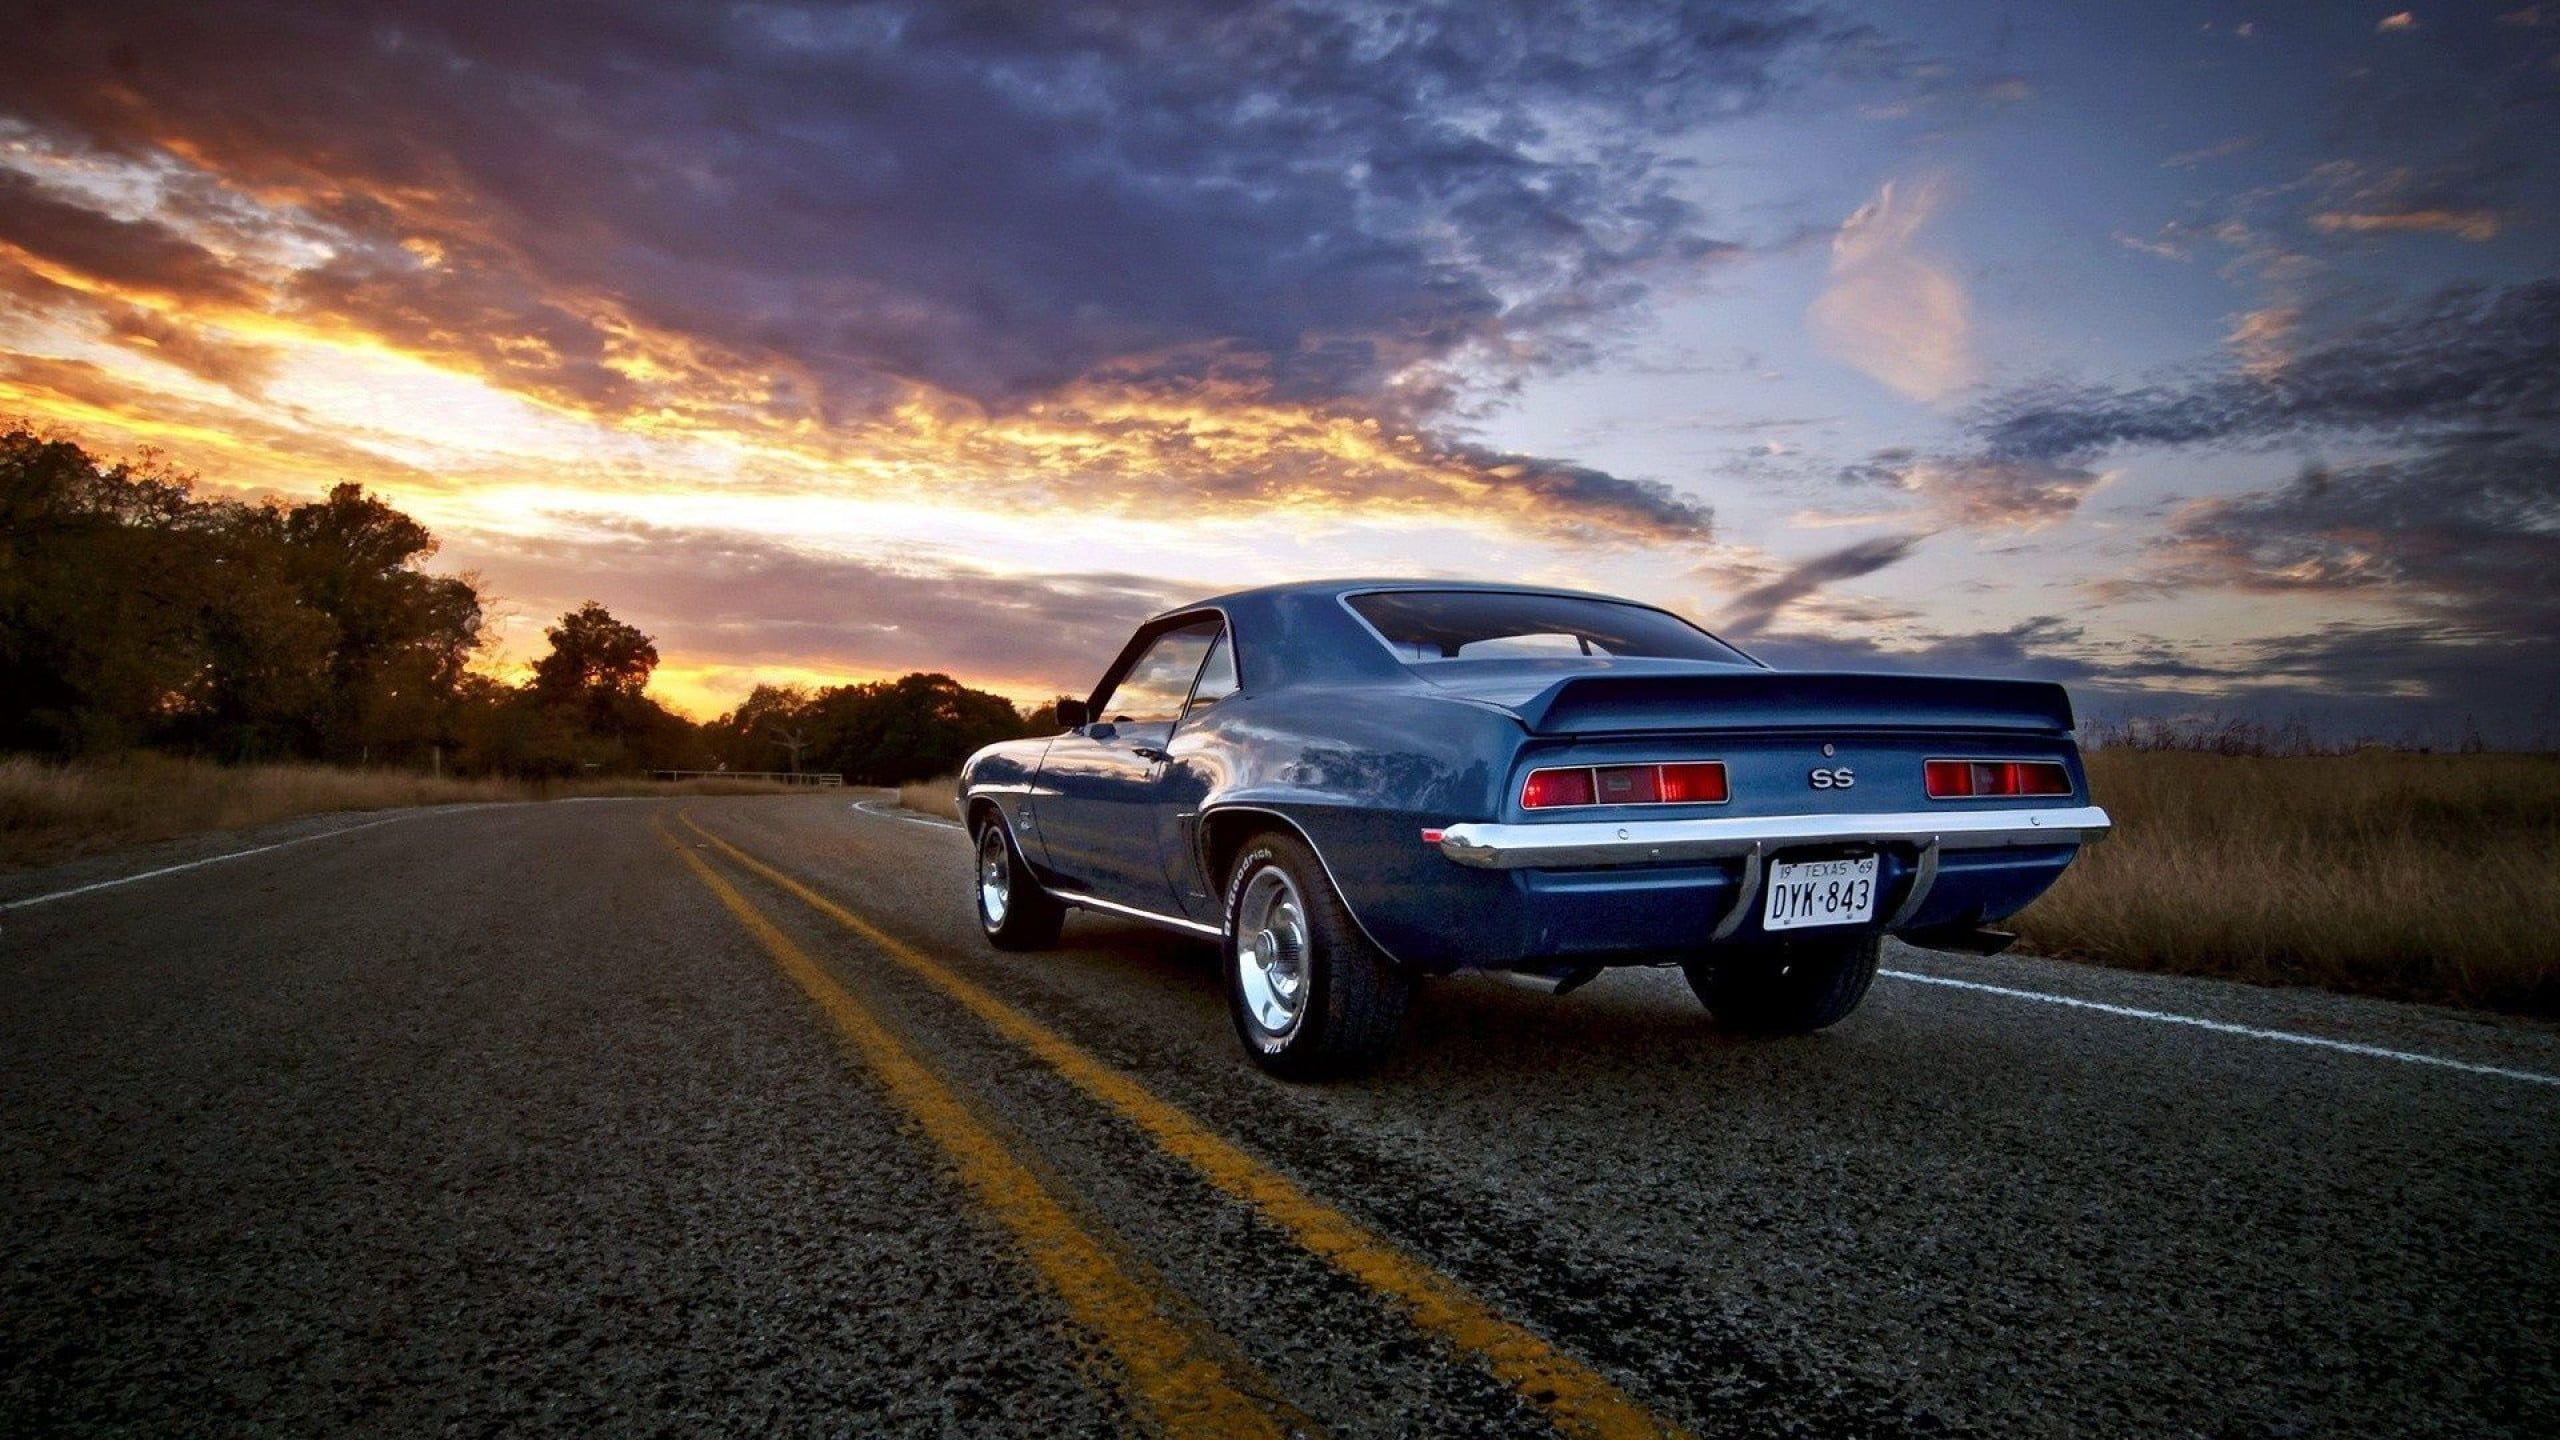 Classic blue Ford Mustang on open road during golden hour HD